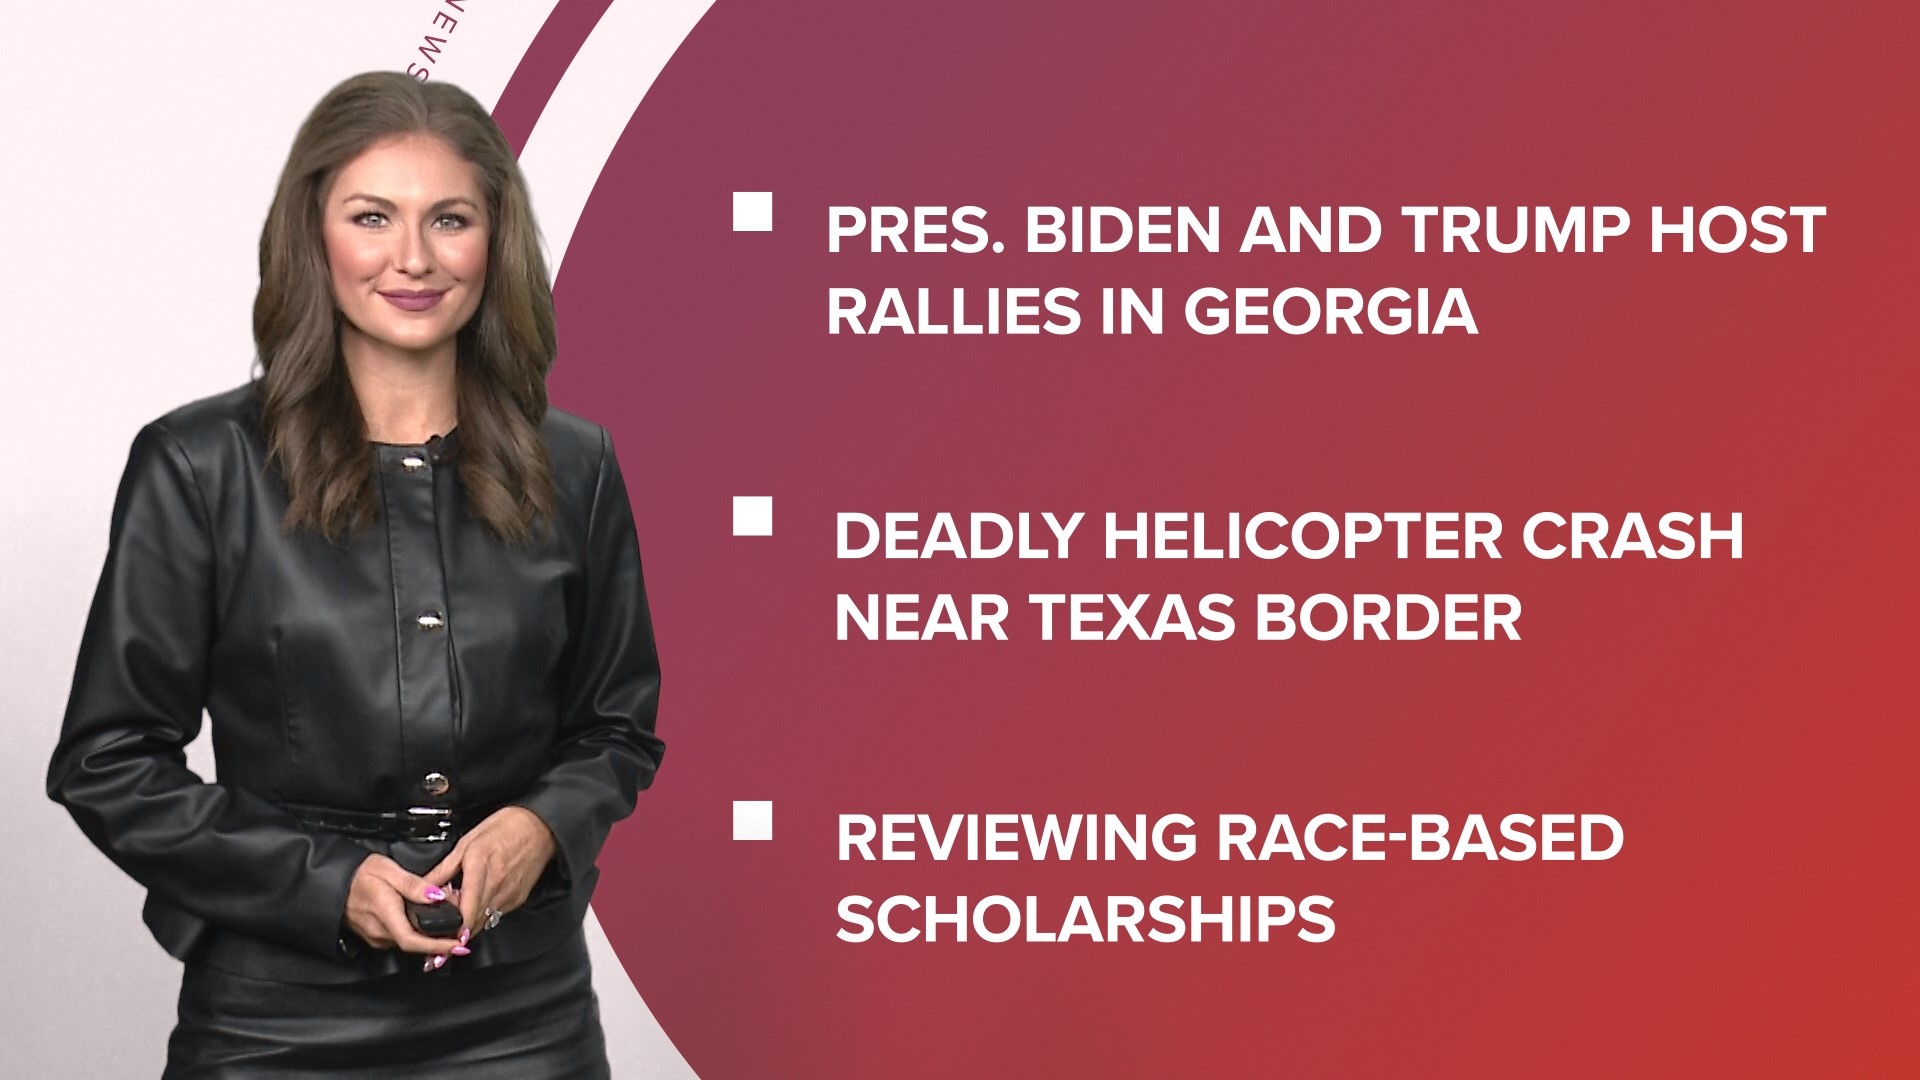 A look at what is happening in the news from Pres. Biden and Trump rally in Georgia to big winners at the Oscars and new Uber features.